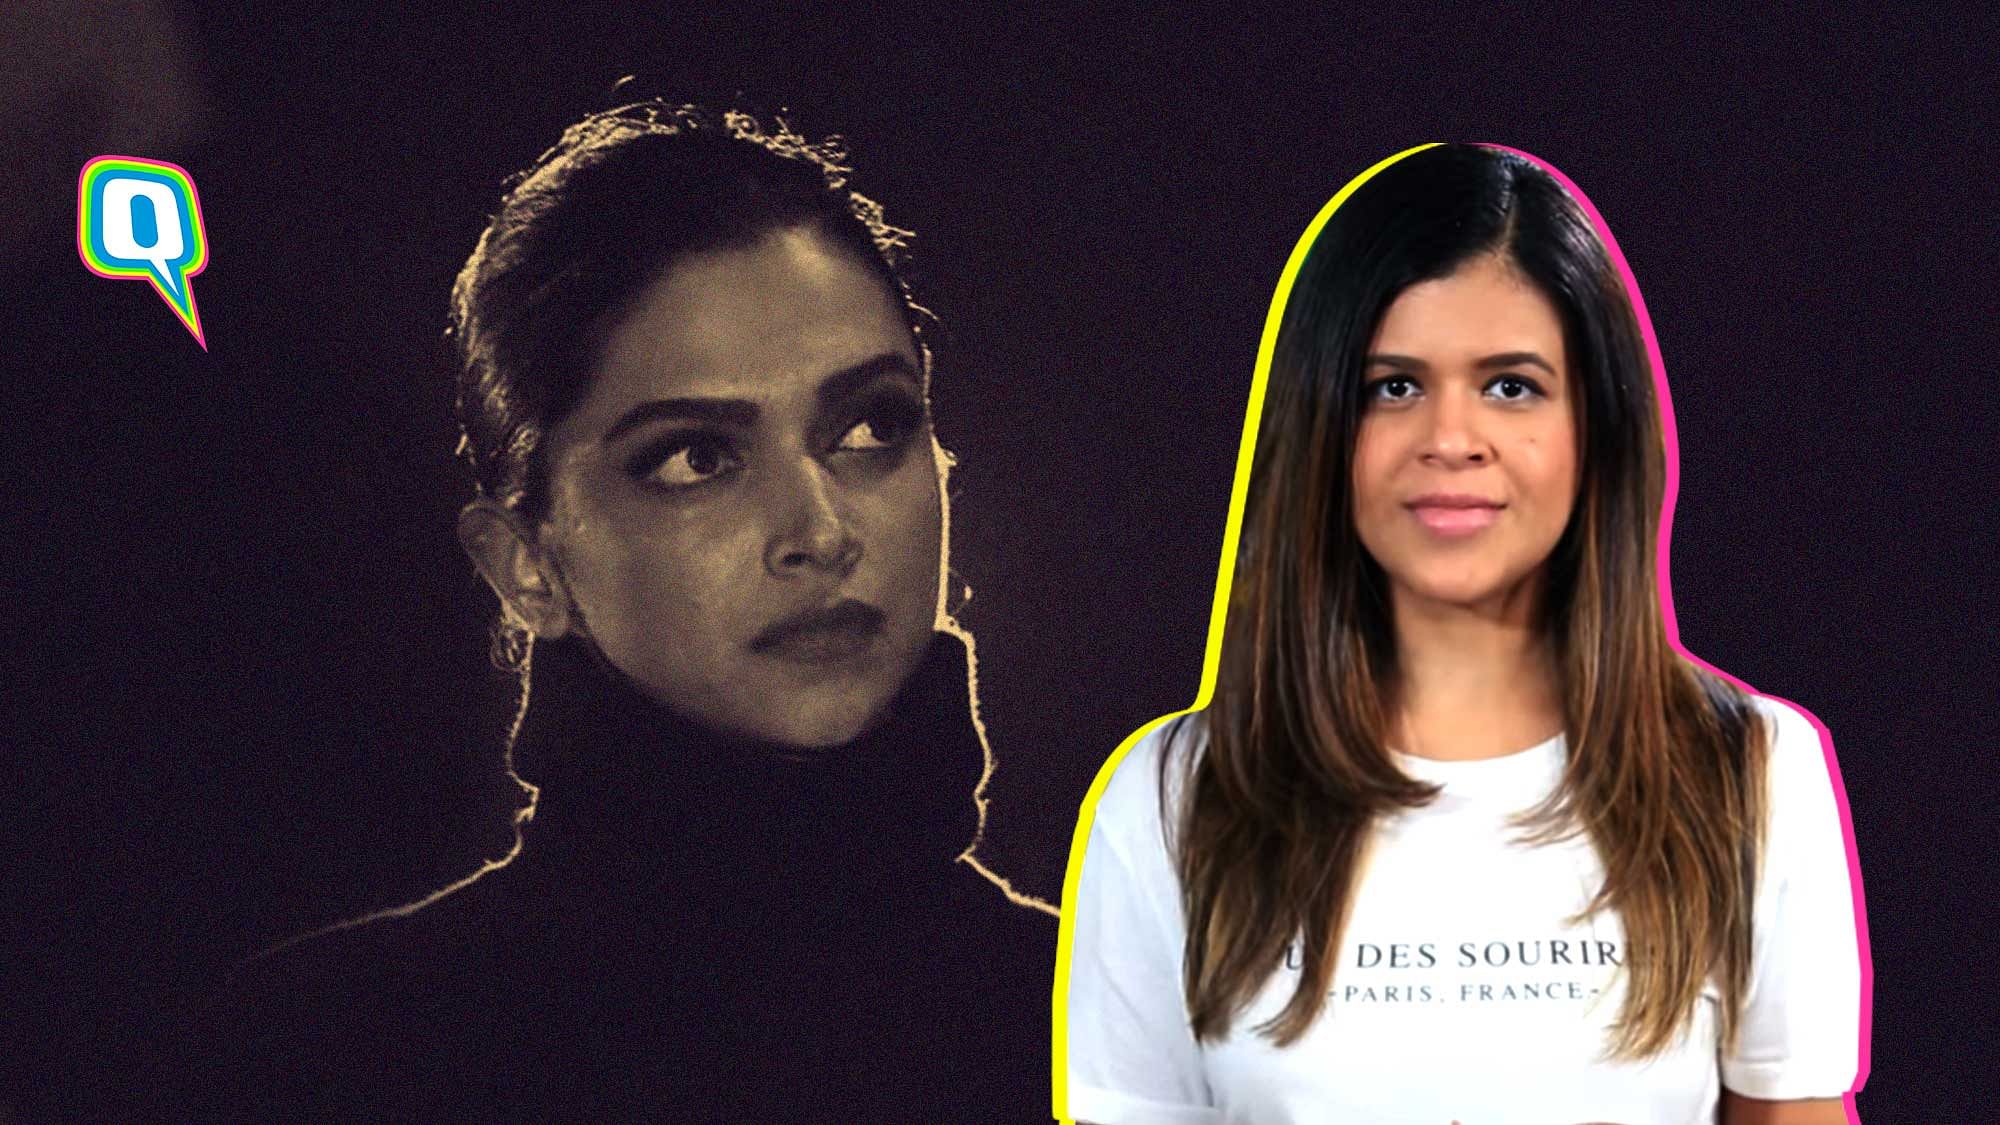 Quint Neon tries to reason with those who want to boycott Deepika Padukone.&nbsp;